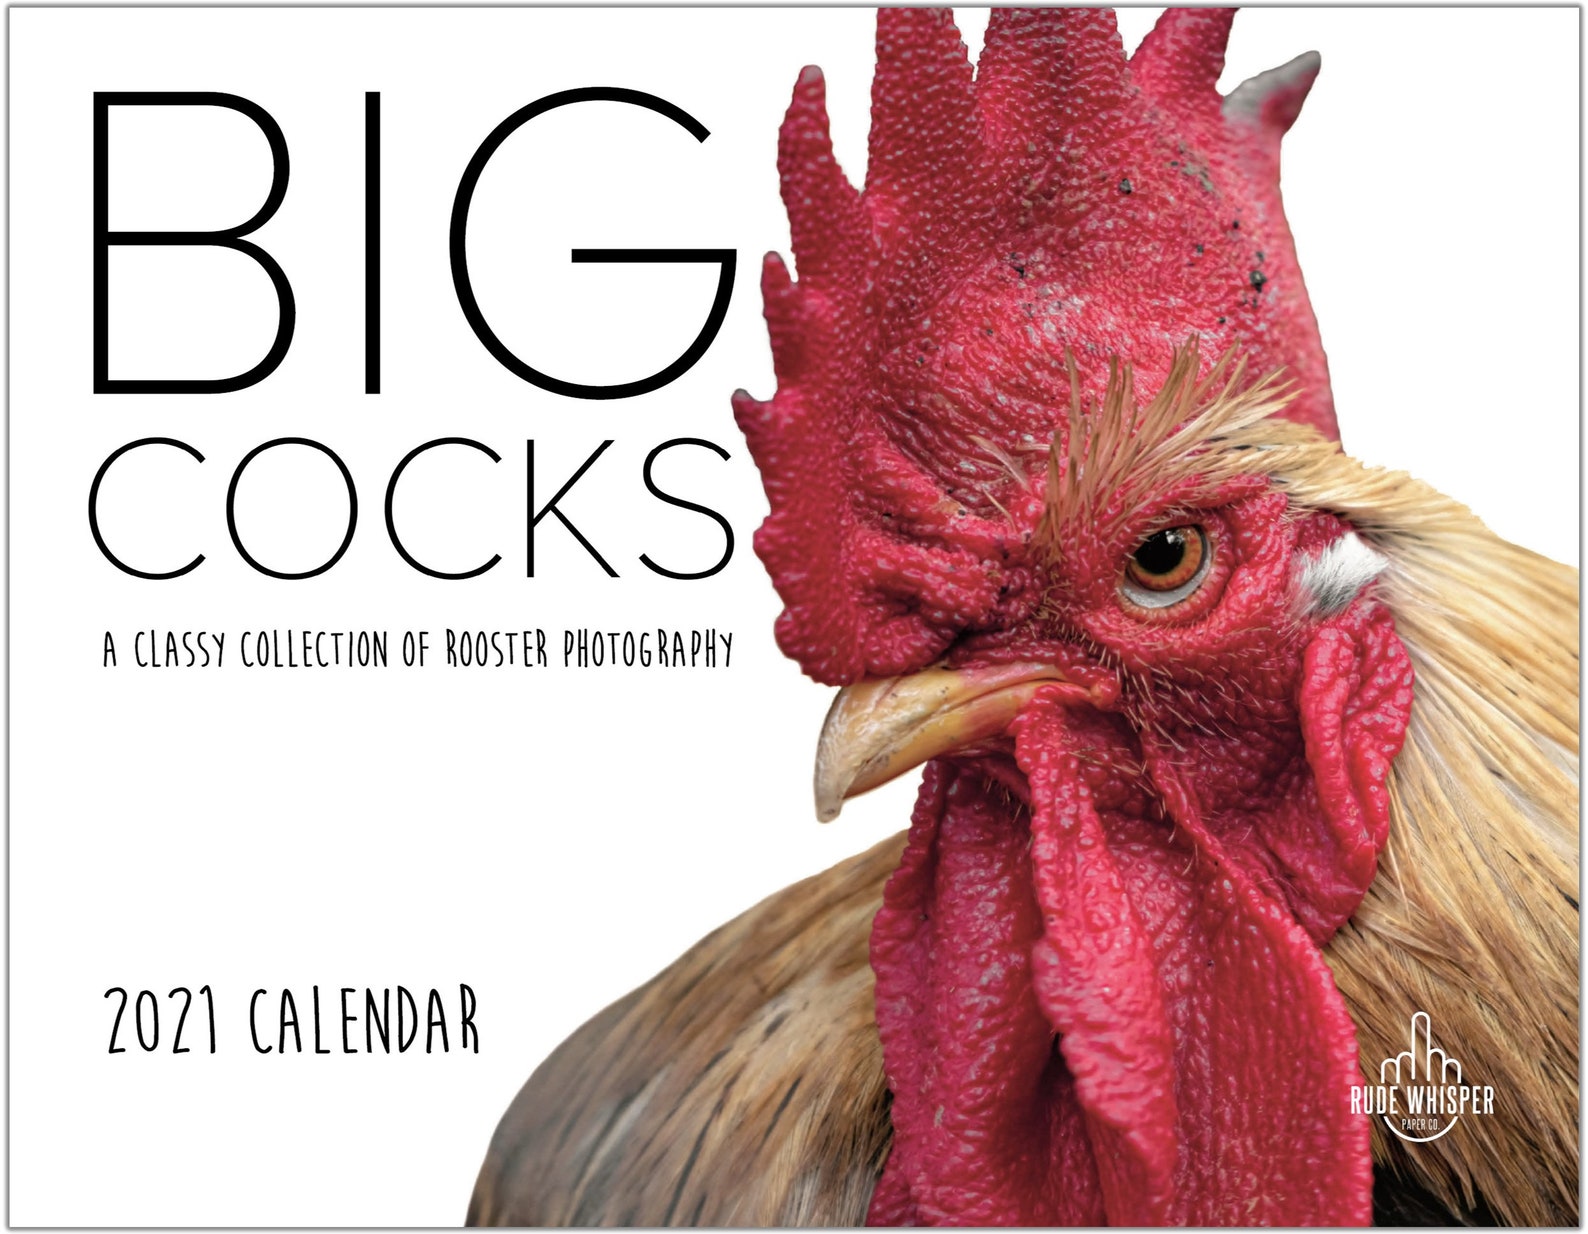 Big Cocks 2021 Wall Calendar A Classy Collection of Rooster | Etsy